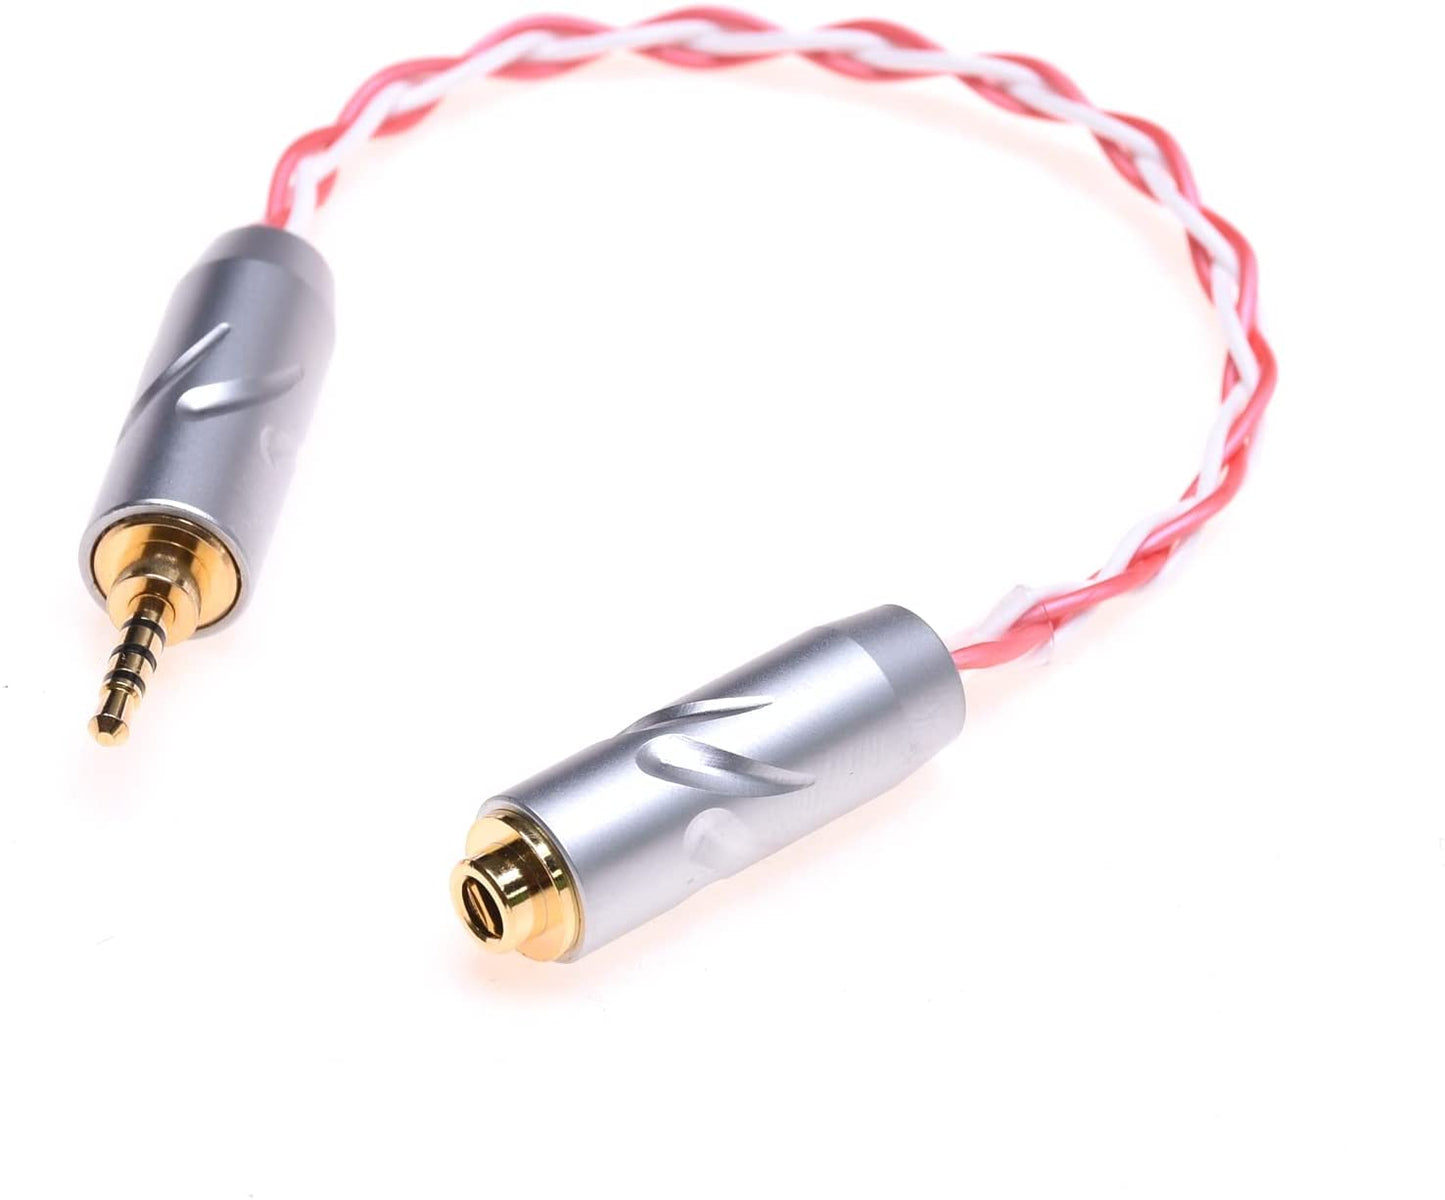 Red/White Cable trrs 2.5mm Male to 3.5mm Female trrs Balanced Audio Adapter Cable Compatible for Astell&Kern AK240 onkyo DP-X1 FIIO HiFiman 2.5mm to 3.5mm trrs Connector